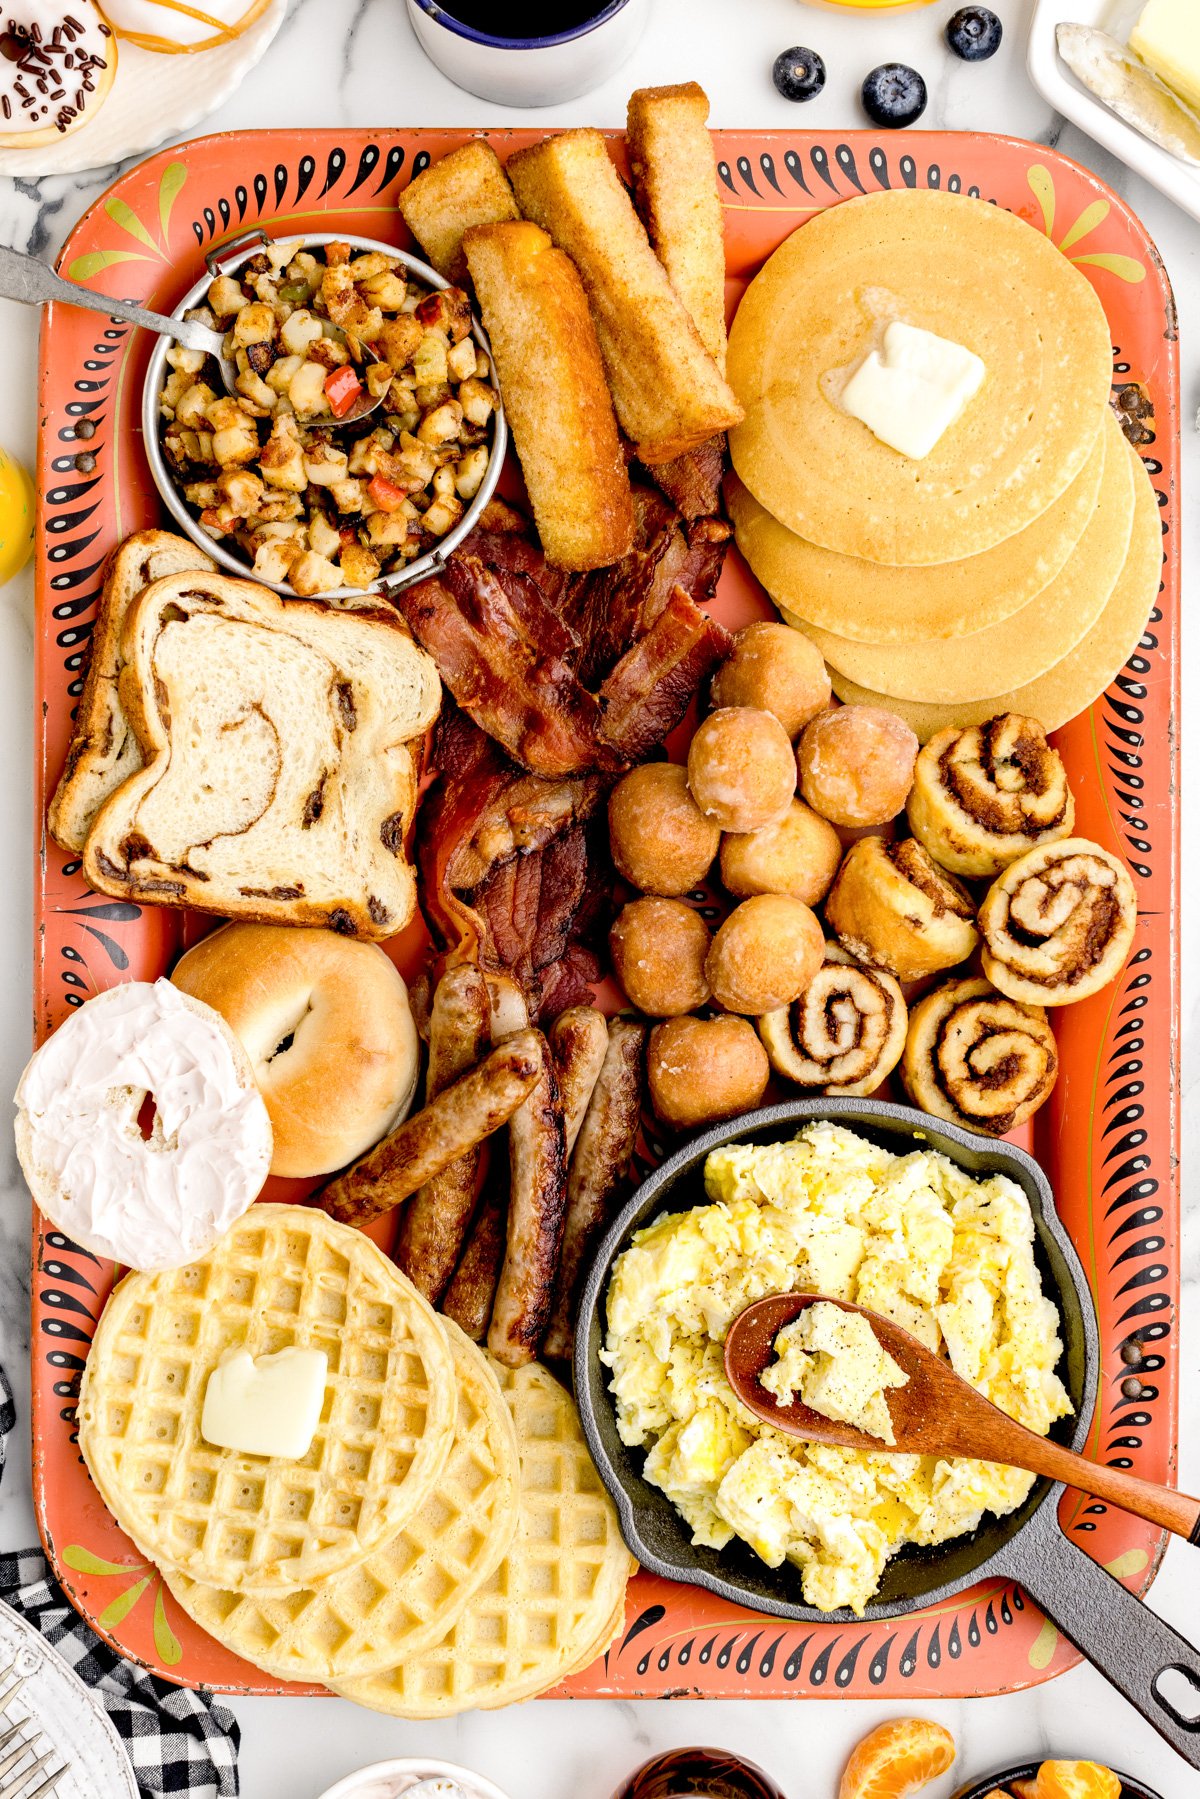 A breakfast charcuterie board filled with eggs, meat, and baked breakfast items.